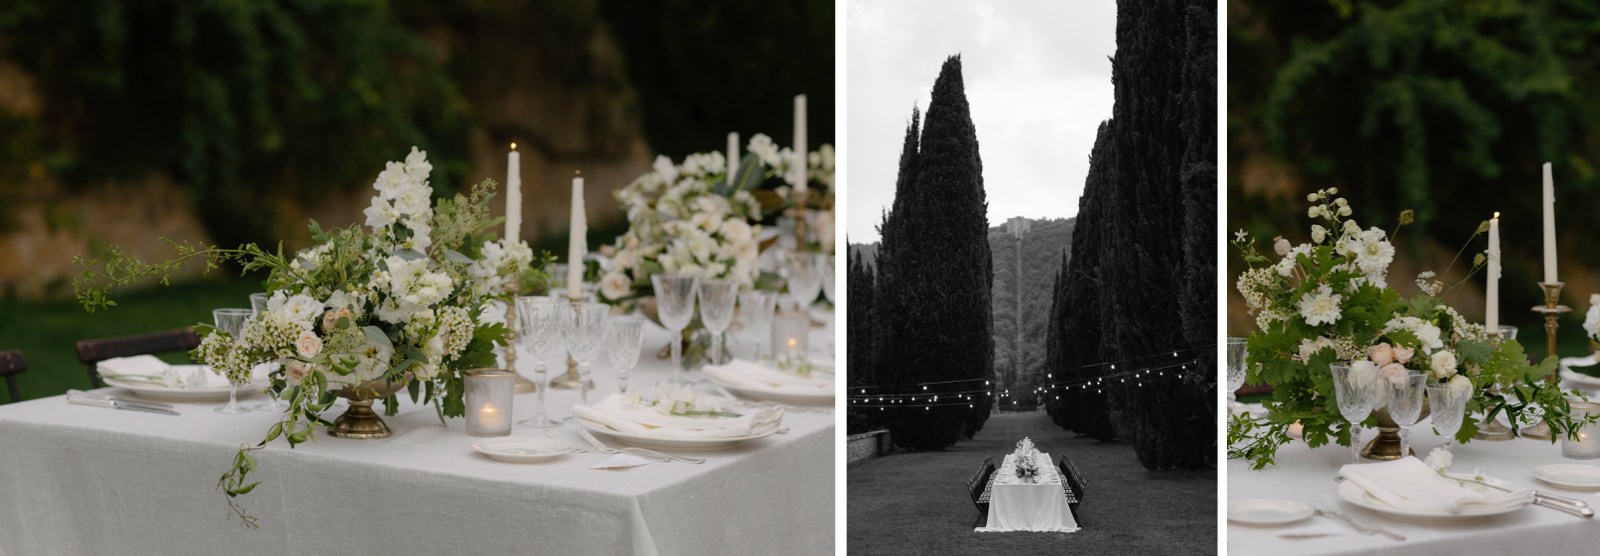 table setting wedding in Tuscany 